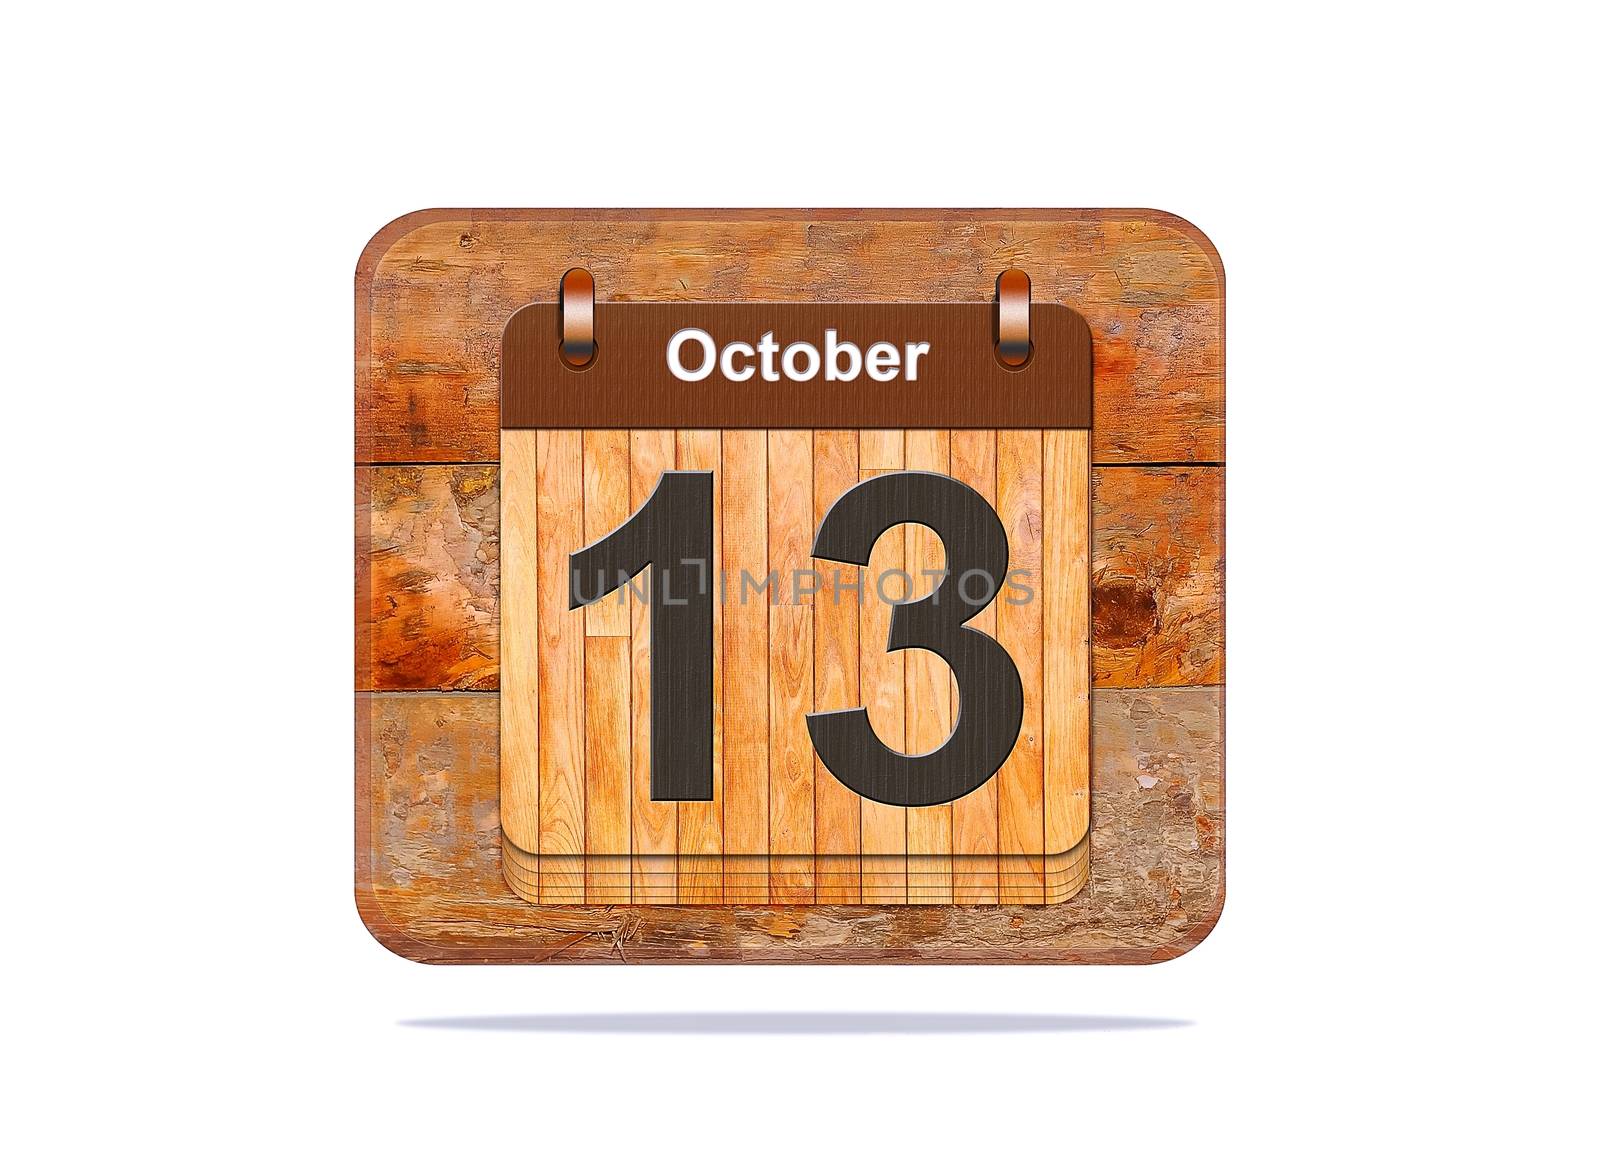 Calendar with the date of October 13.